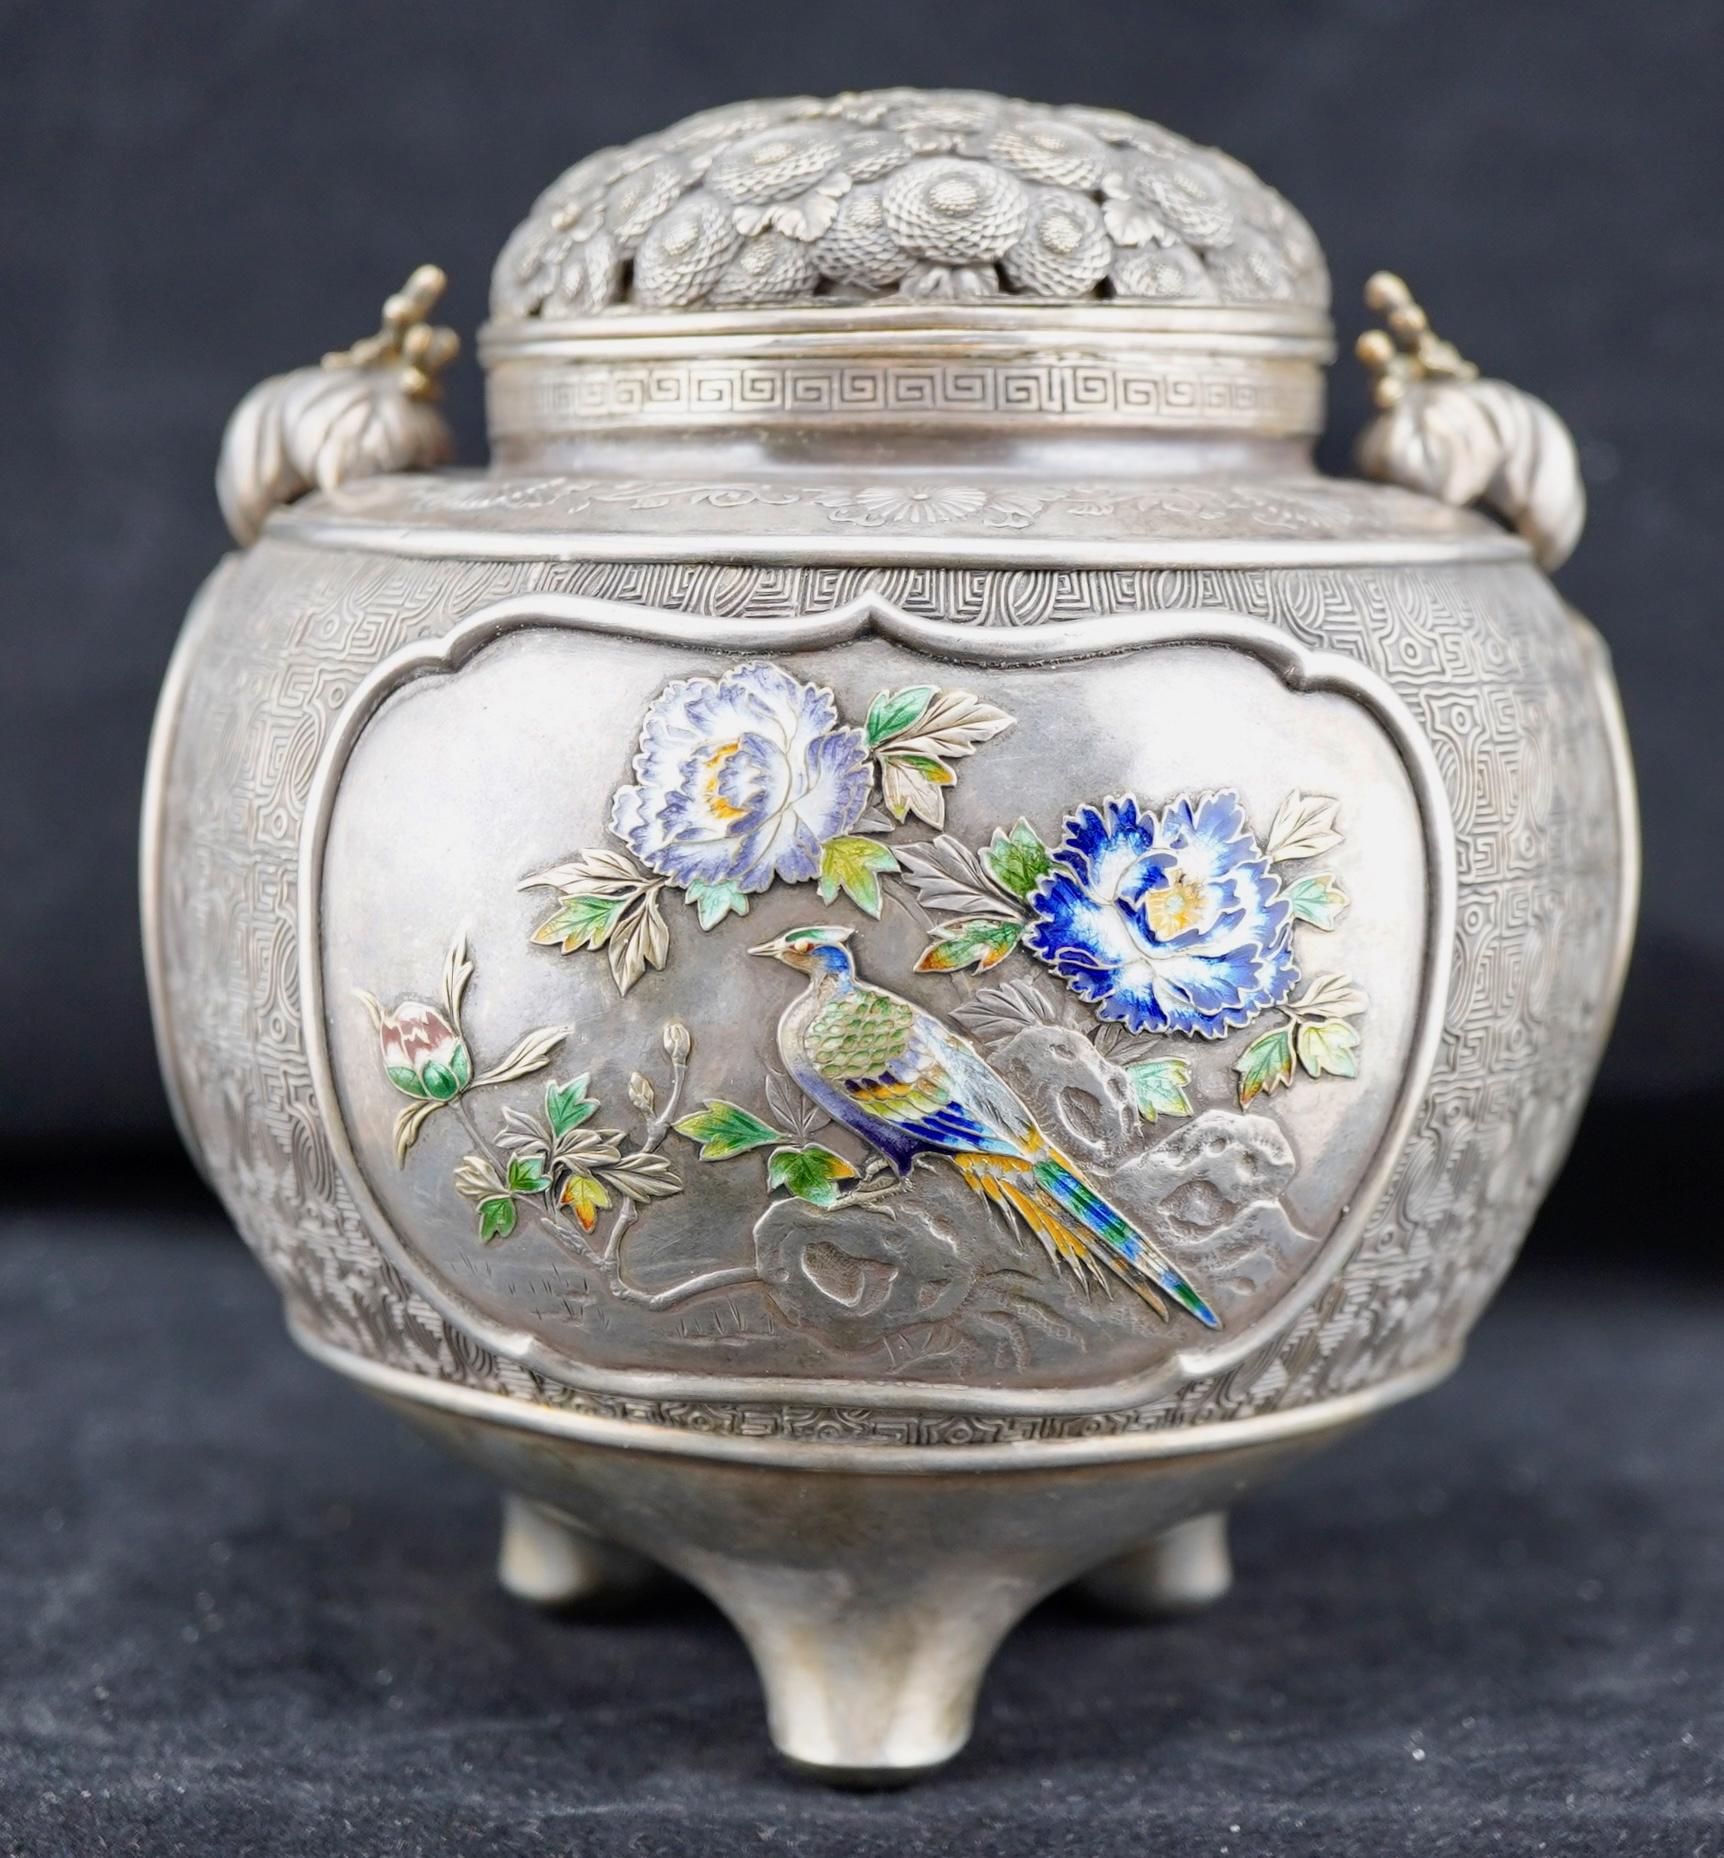 Japanese silver and enamel Incense Burner (Koro) Meiji era (1868-1912), late 19th century. The koro is set on tripod feet, The body decorated with three panels of birds and flowers worked in low relief and translucent enamels.  The body carved with